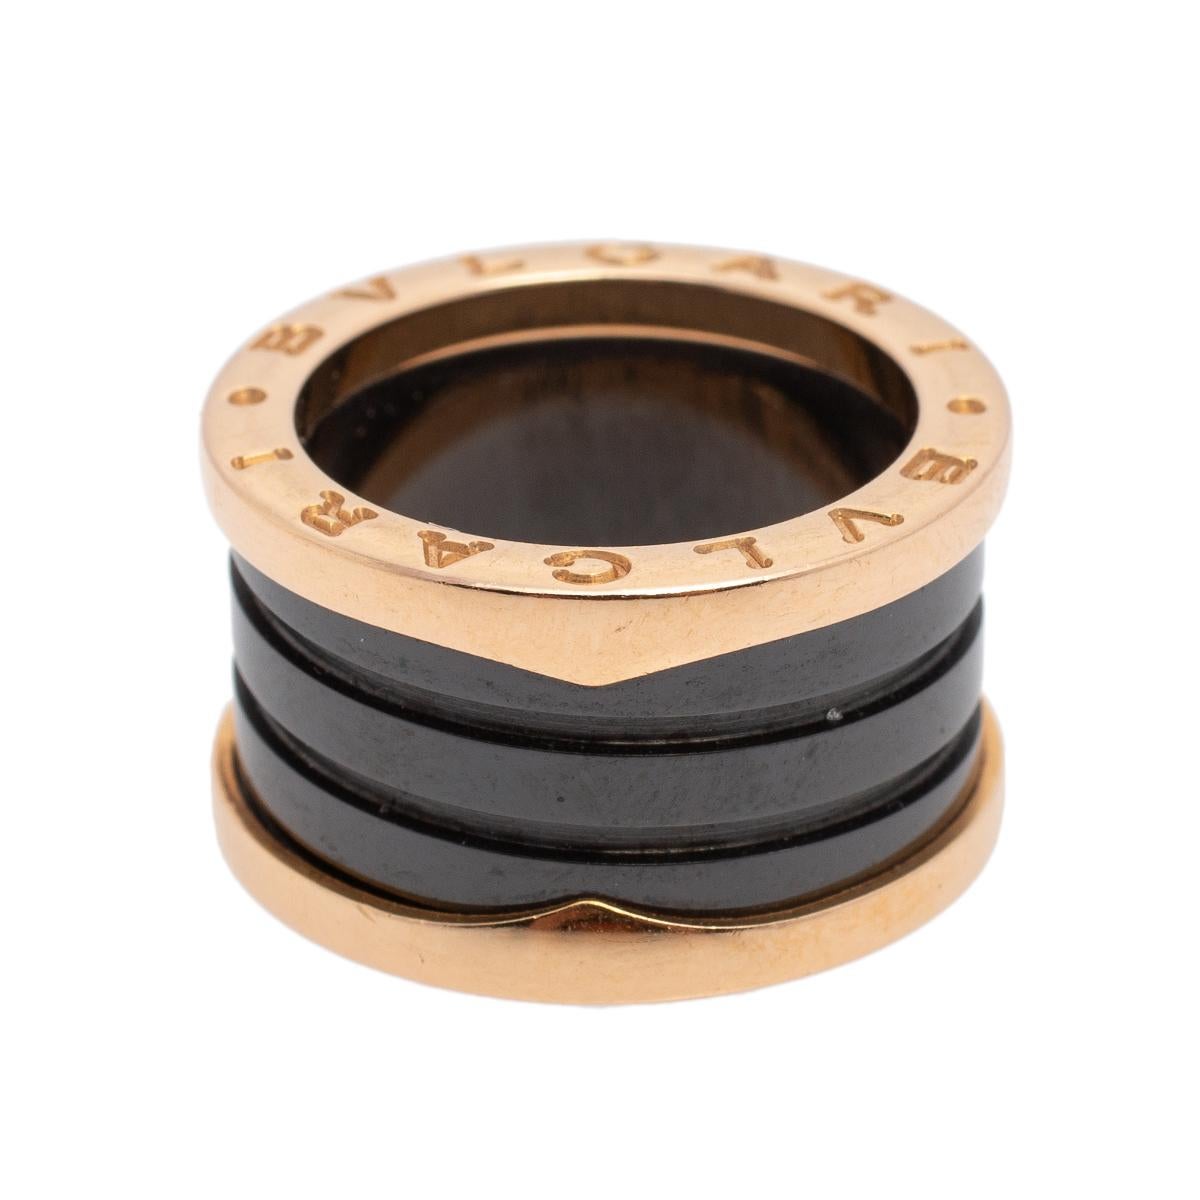 Unique and modern, this charming B.Zero1 band ring is from one of Bvlgari's iconic collections. Beautifully crafted from 18k rose gold and black ceramic in a four-band style, it is engraved with the BVLGARI logo. Inspired by the Colosseum, this ring